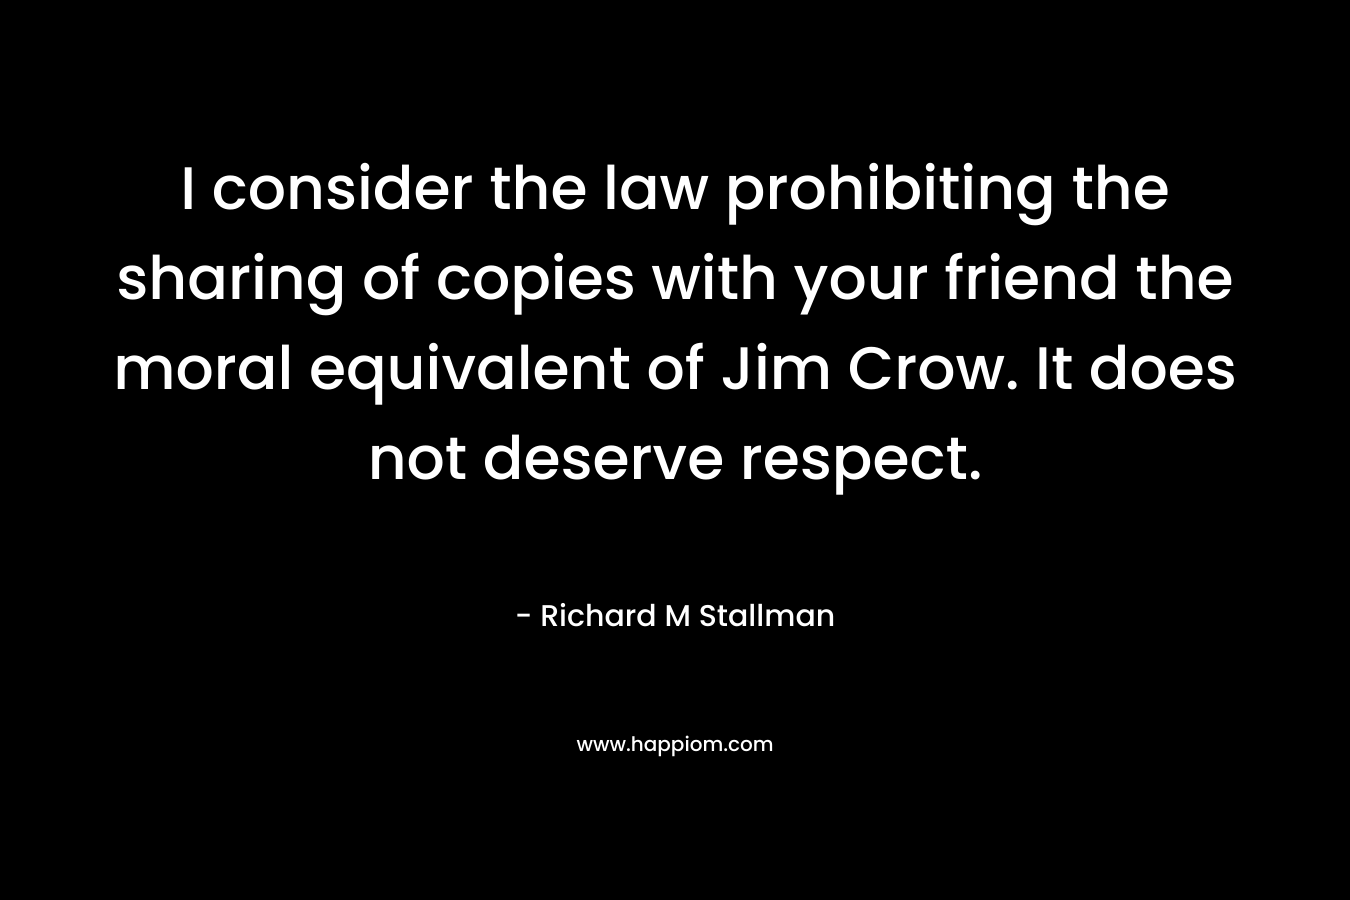 I consider the law prohibiting the sharing of copies with your friend the moral equivalent of Jim Crow. It does not deserve respect. – Richard M Stallman